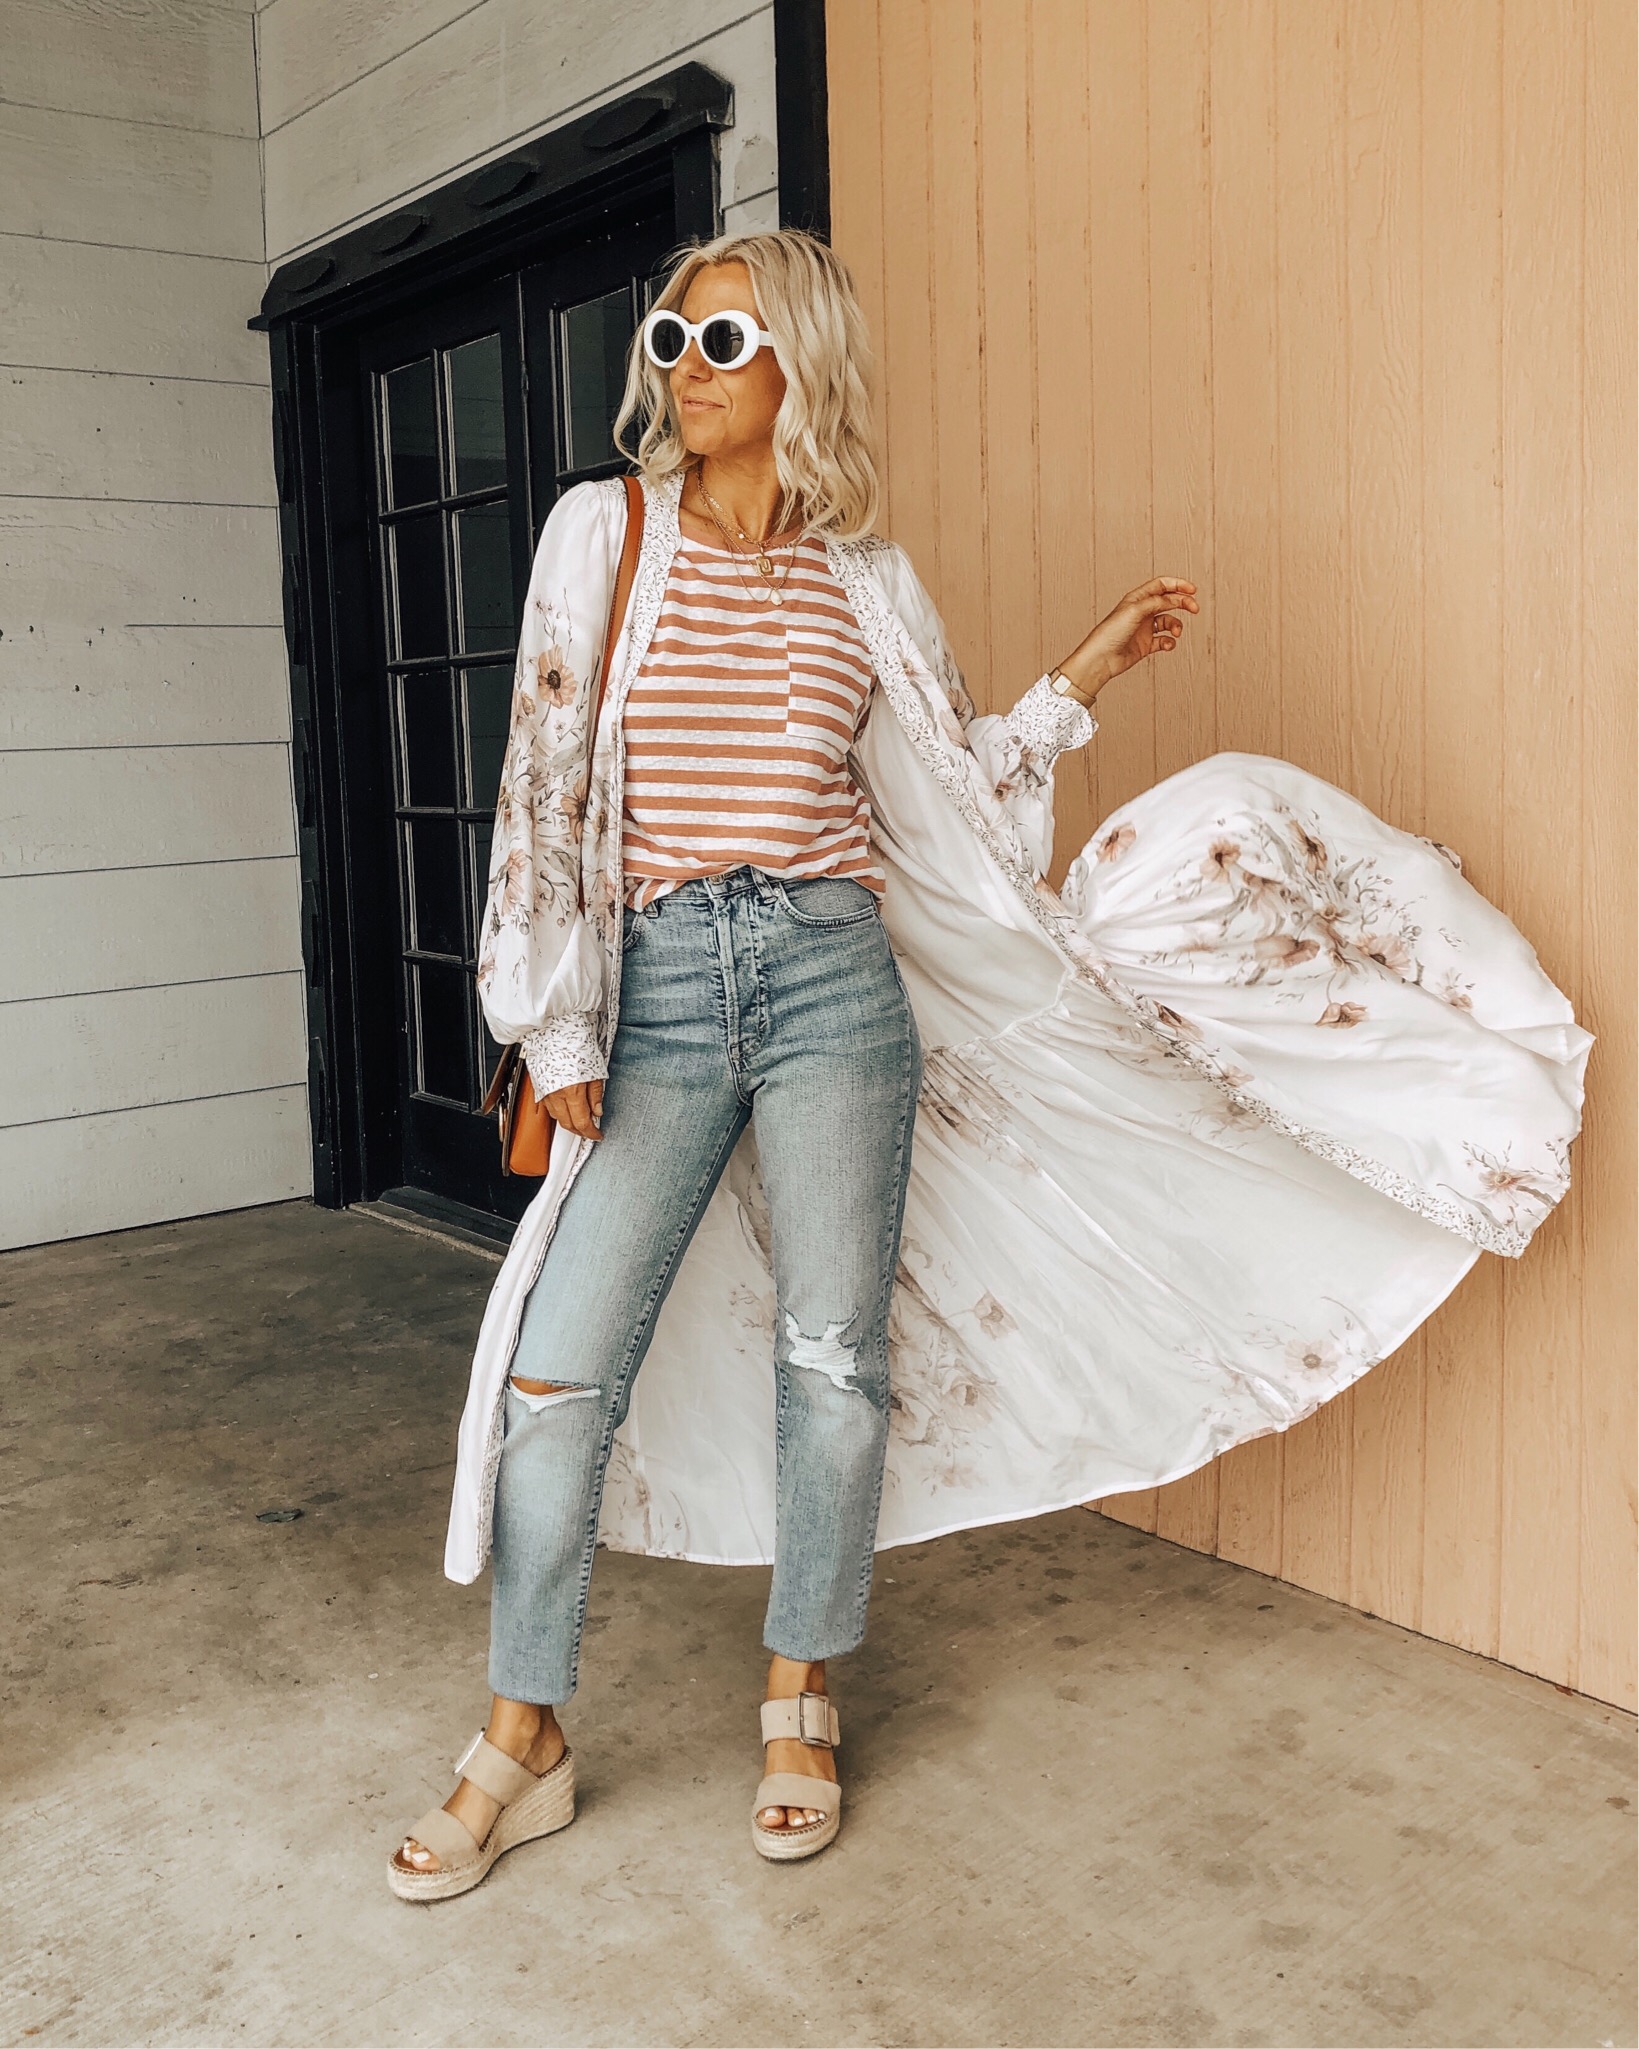 MEMORIAL DAY WEEKEND SALES- Jaclyn De Leon Style + Are you looking to update your wardrobe for the Summer? There are so many amazing sales this holiday weekend and so I'm sharing all the details including my top picks from each retailer! Don't miss these deals